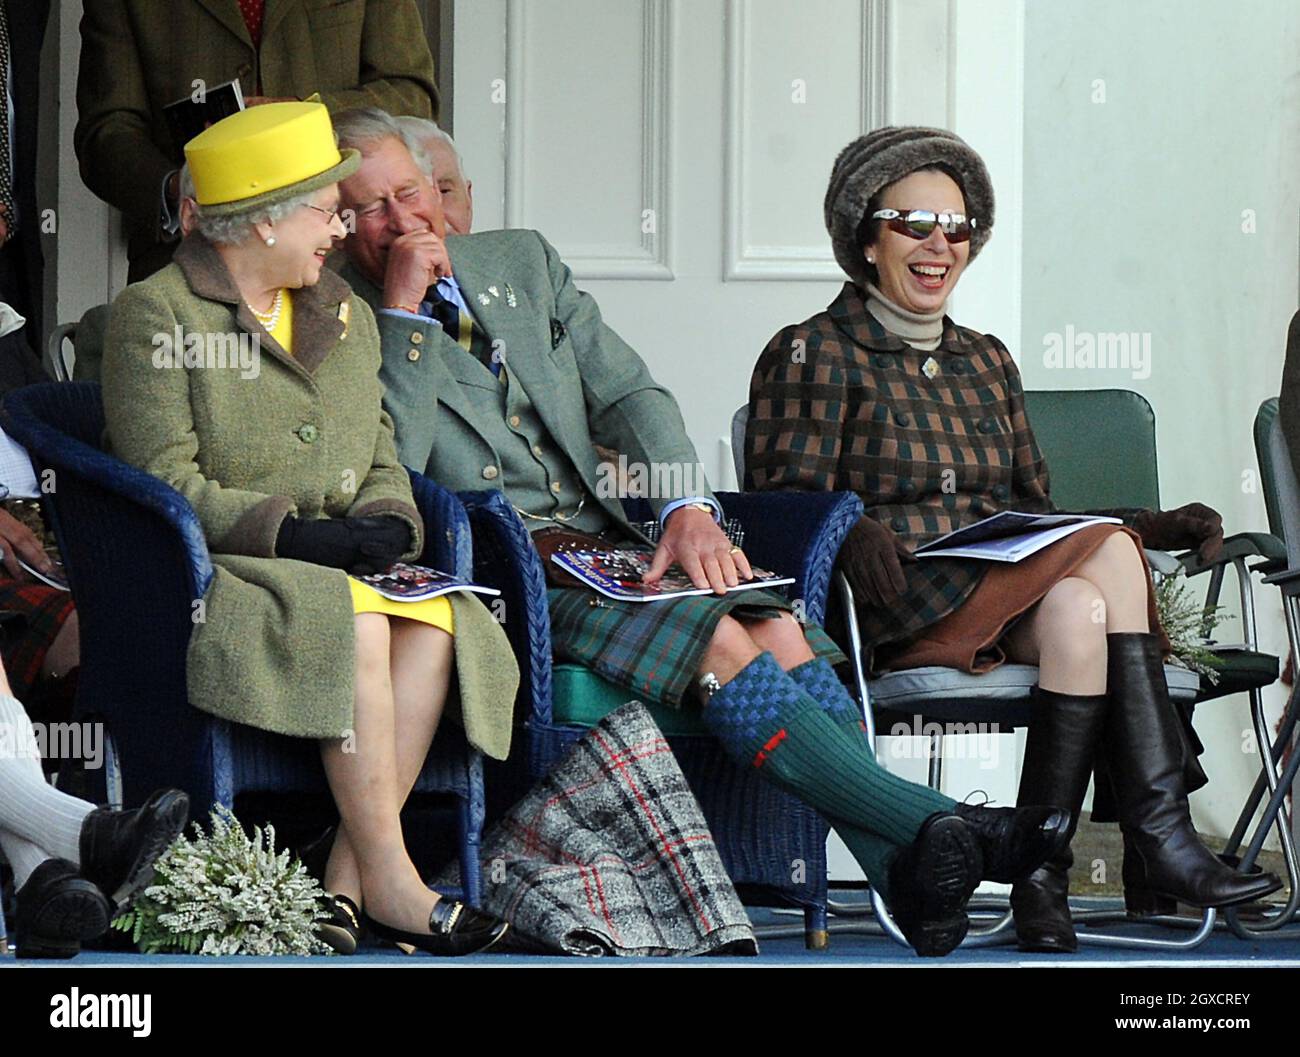 Queen Elizabeth II, Prince Charles, Prince of Wales and Princess Anne, Princess Royal watch the events at the 2009 Braemar Highland Games on September 5, 2009 in Braemar, Scotland. The Braemar Gathering is world famous with thousands of visitors descending on the small Scottish village each year to watch the Games, a Scottish Tradition stretching back hundreds of years. Stock Photo